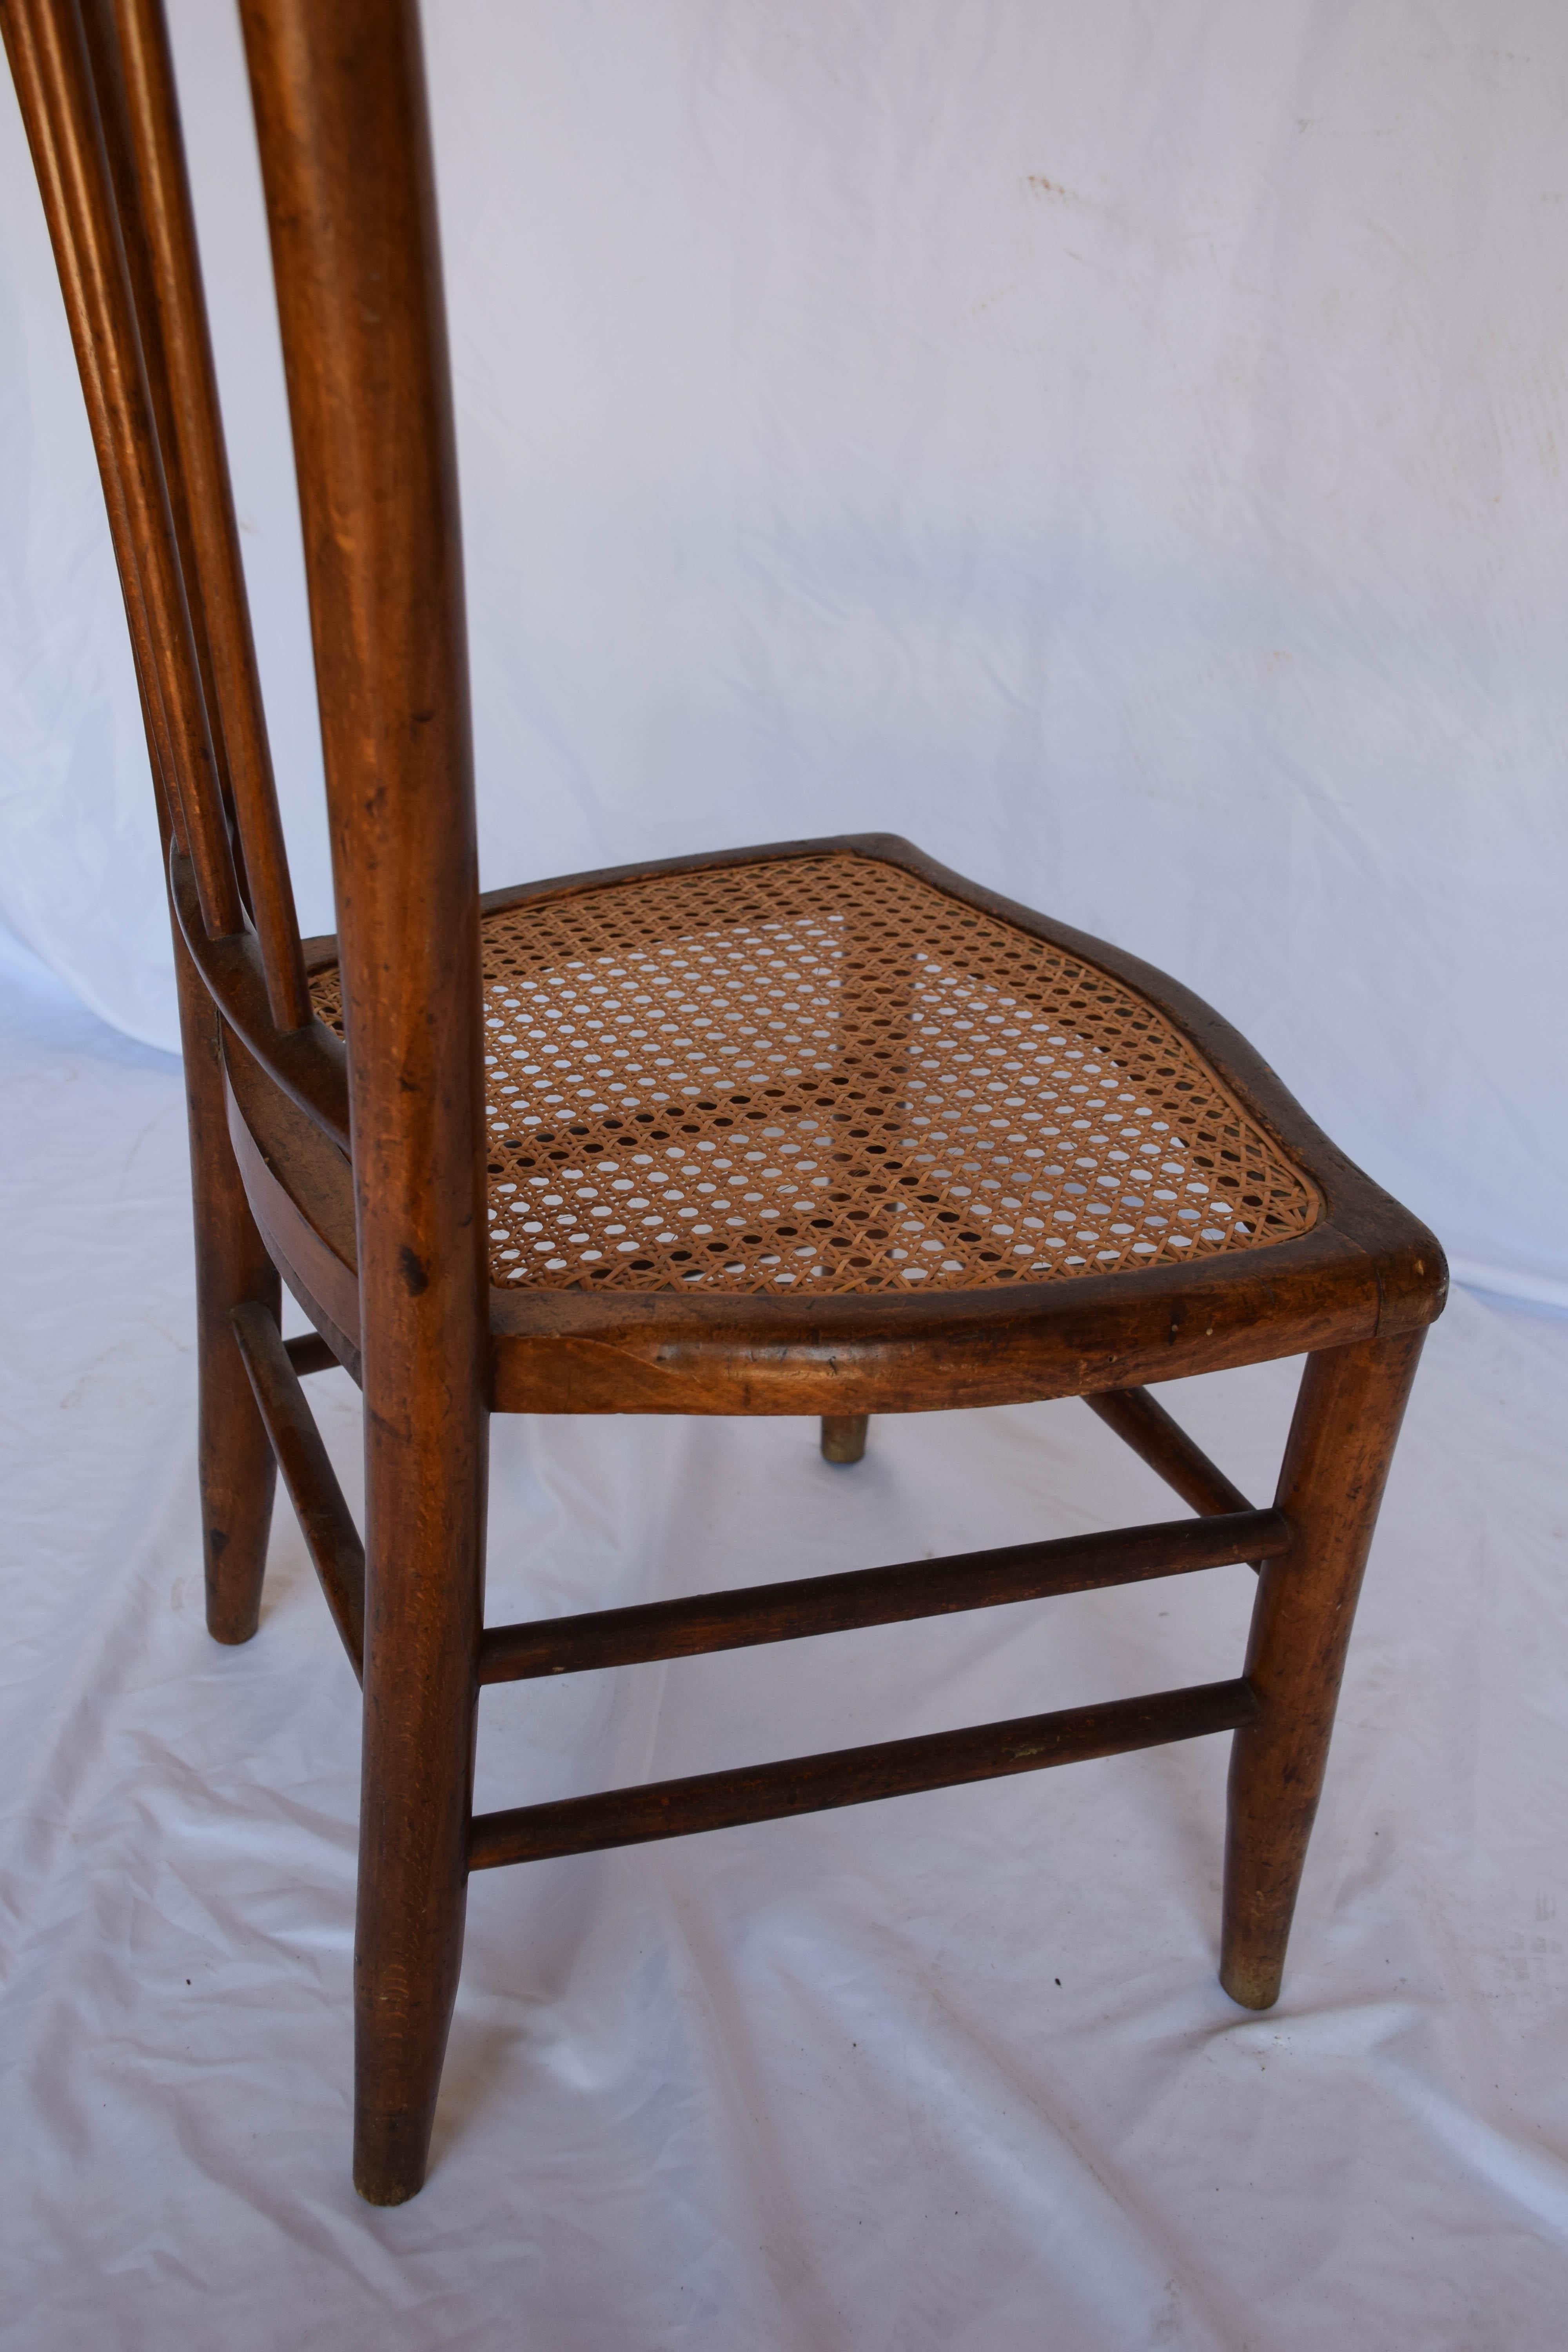 19th Century French Cane Seat Child's Chair